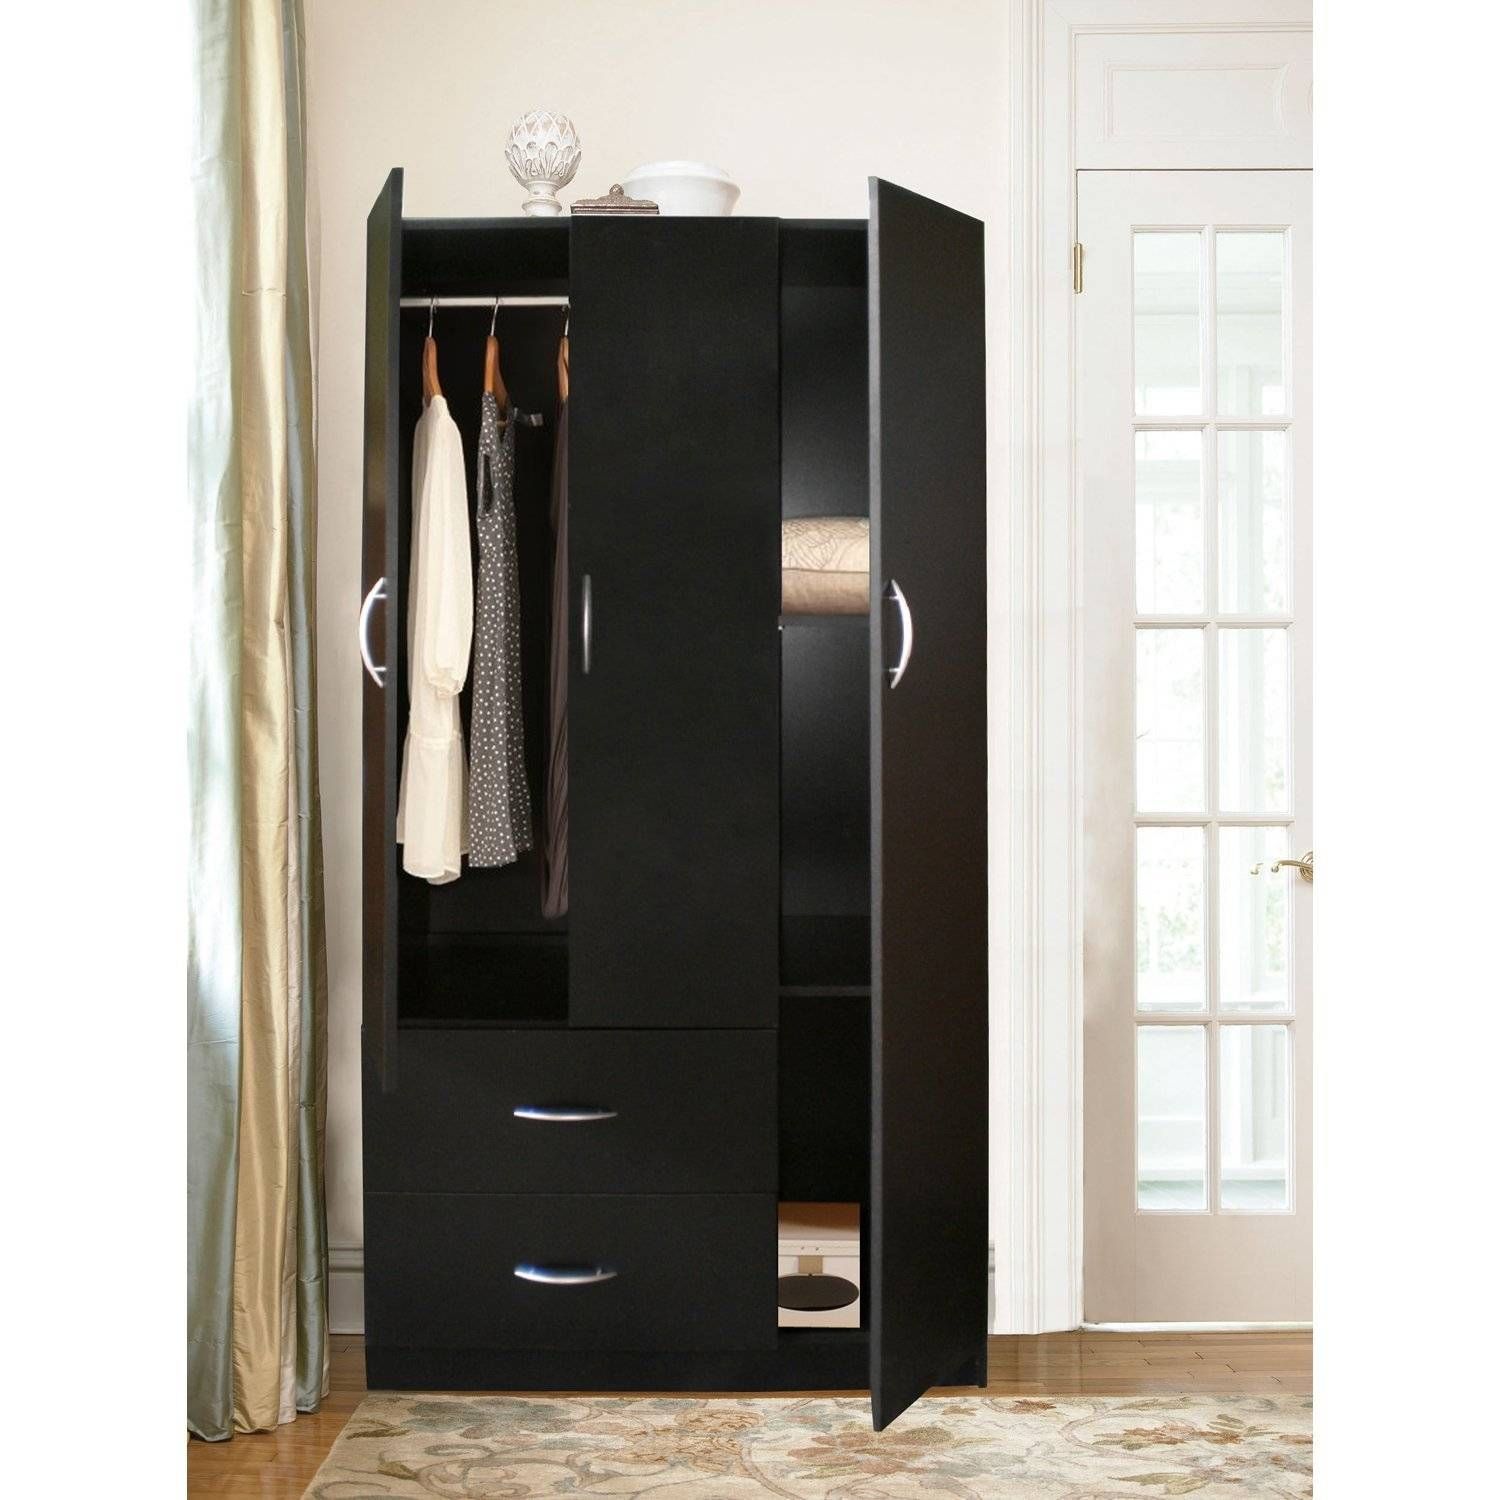 Furniture: Fancy Wardrobe Armoire For Wardrobe Organizer Idea Pertaining To 2 Door Wardrobe With Drawers And Shelves (View 22 of 30)